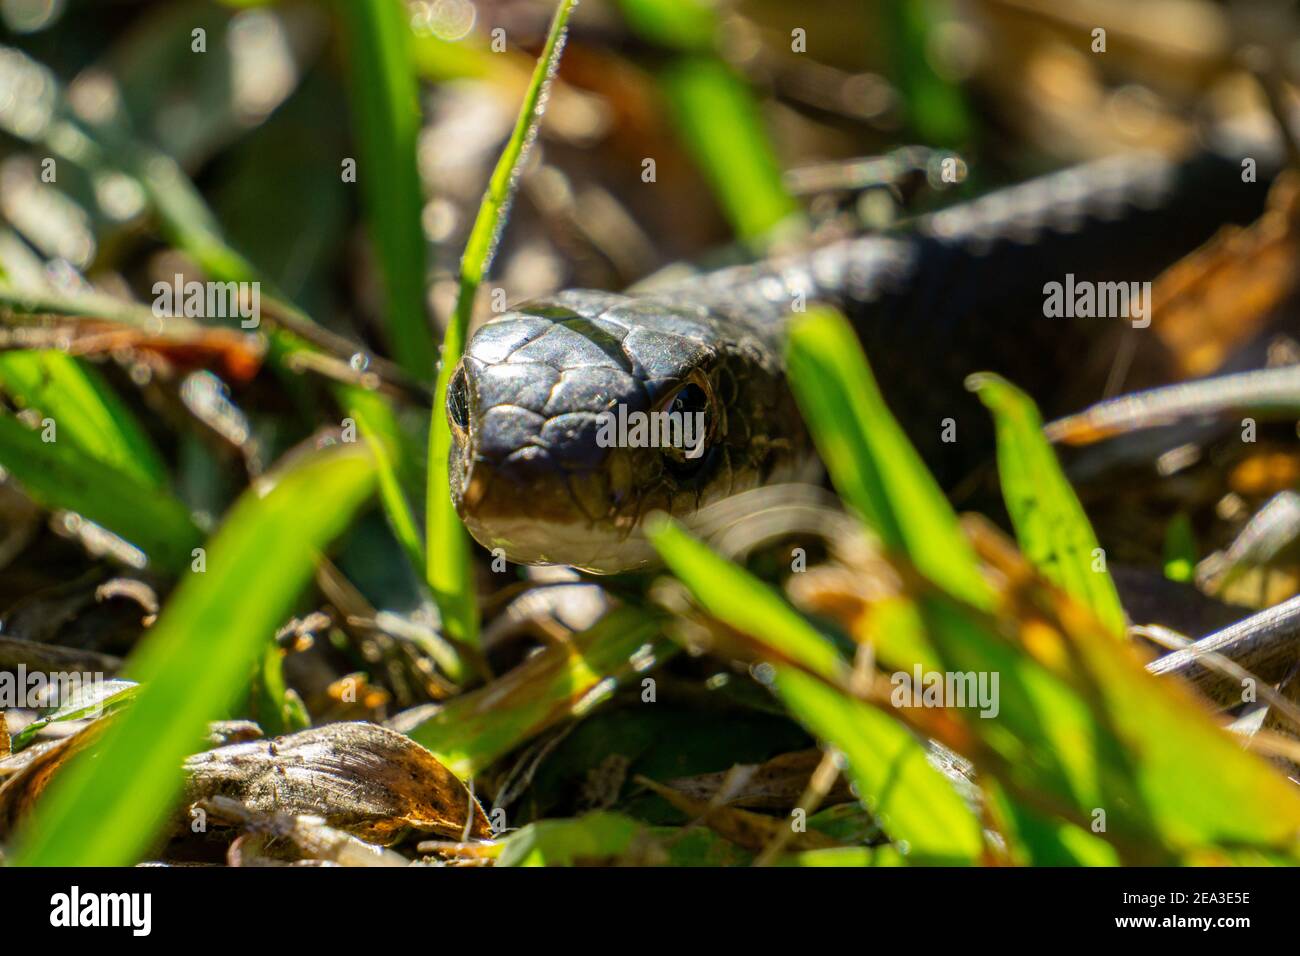 Southern Black Racer (Coluber constrictor ssp. priapus) snake in grass close up Stock Photo